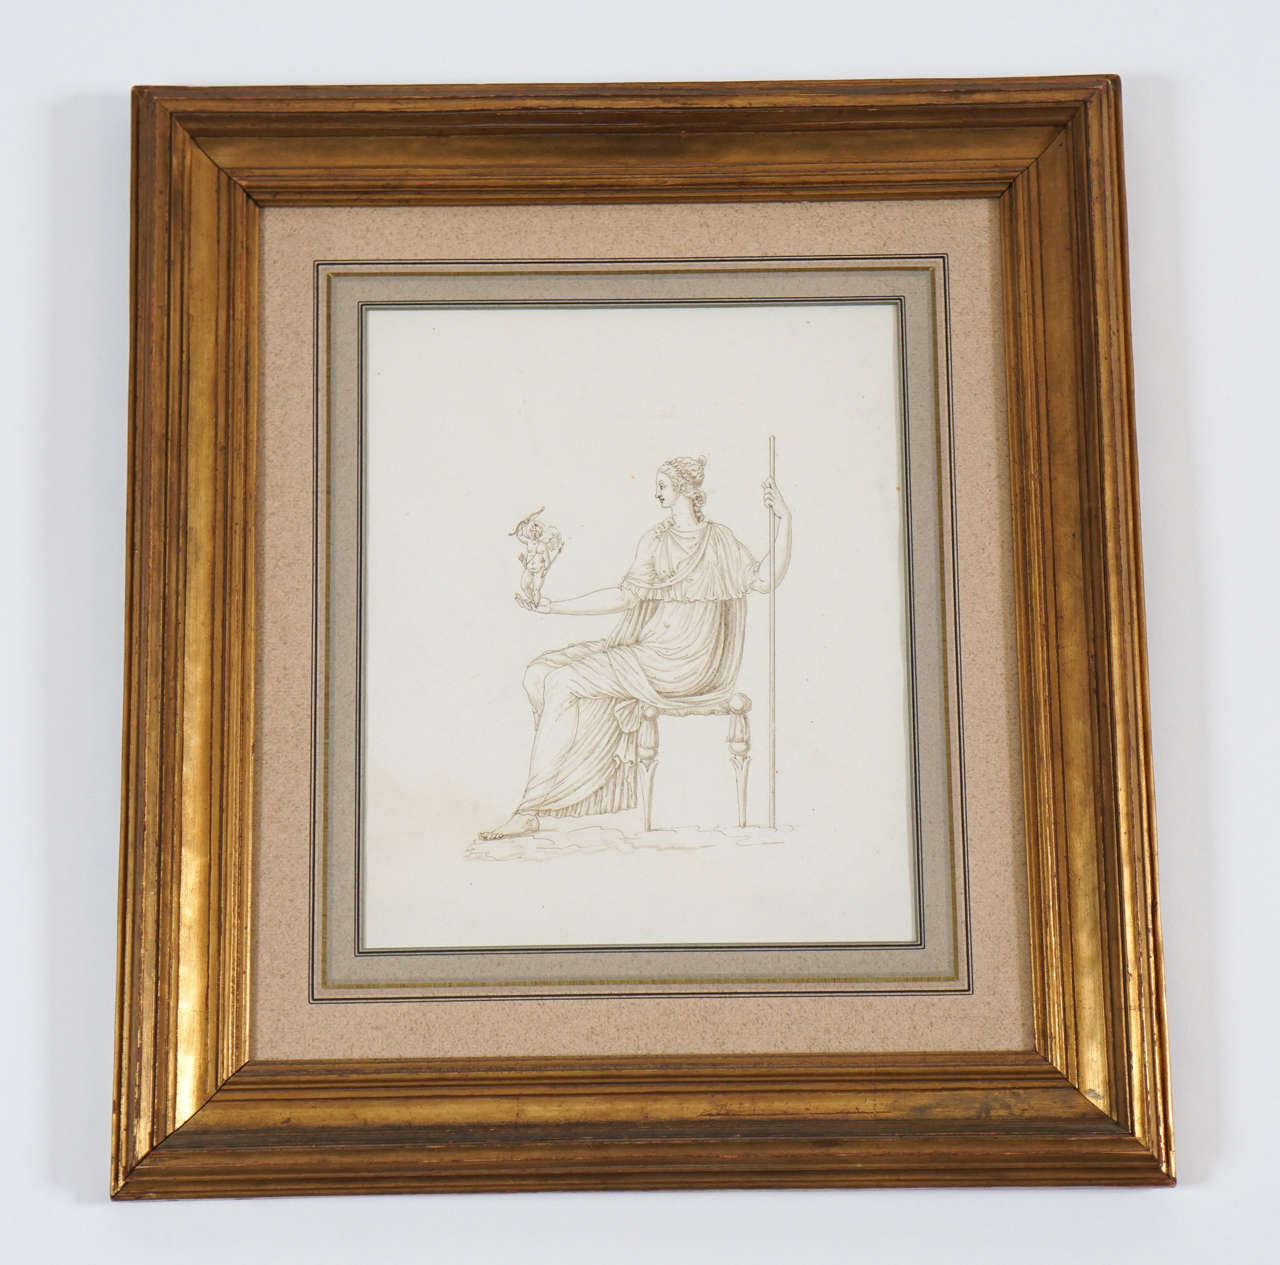 Italian neoclassical sepia drawing of the Roman goddess Venus seated with cupid in right palm. Professionally archival mounted in burnished gilt frame with compound French matting by J. Pocker & Son. Image sight measurements are 10.25